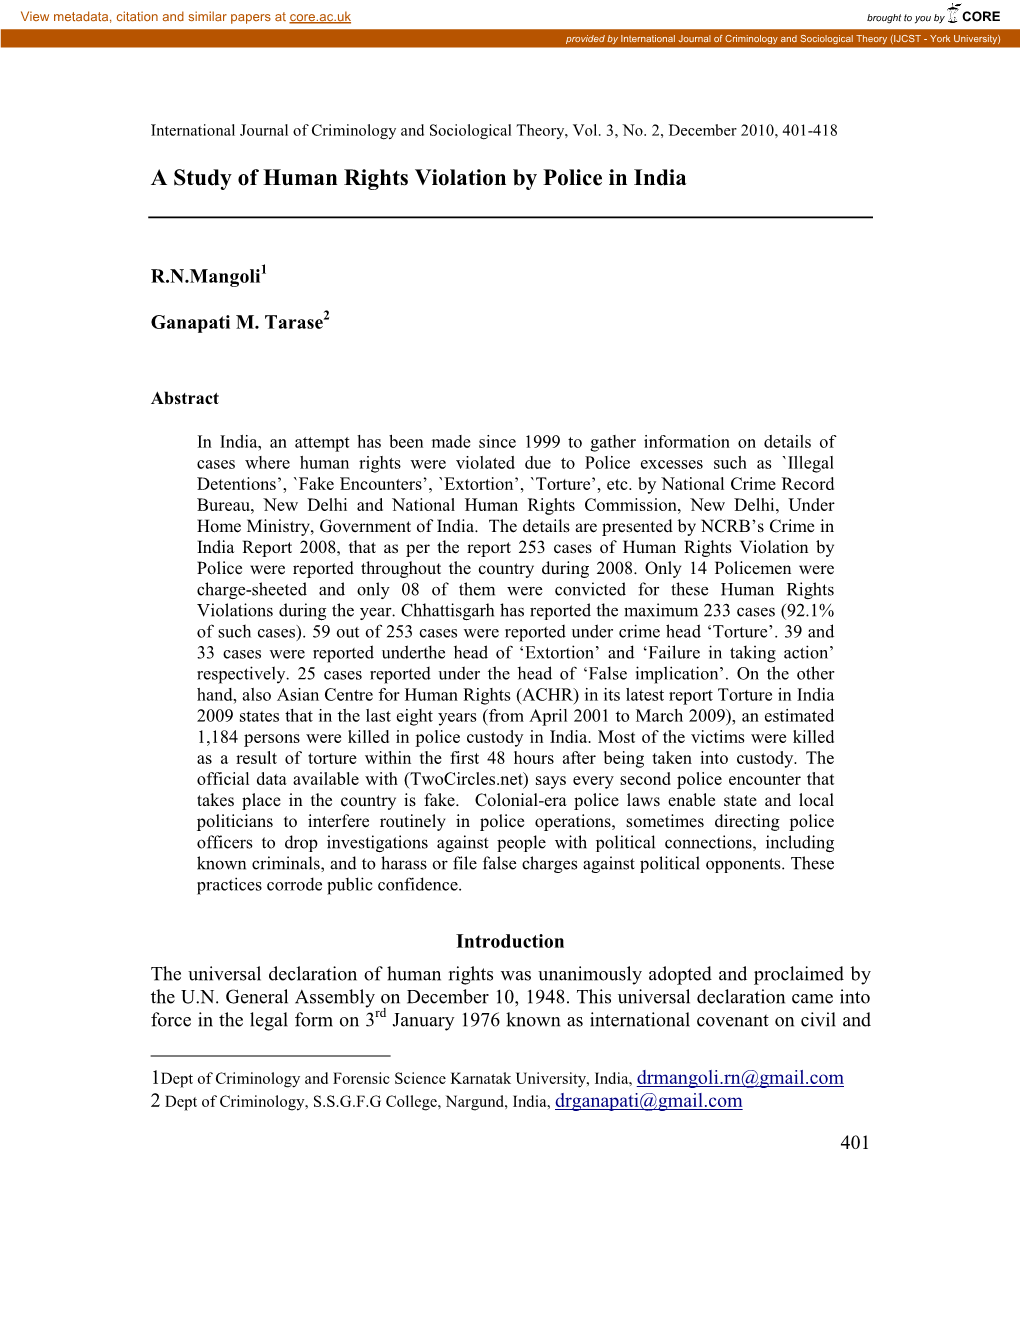 A Study of Human Rights Violation by Police in India